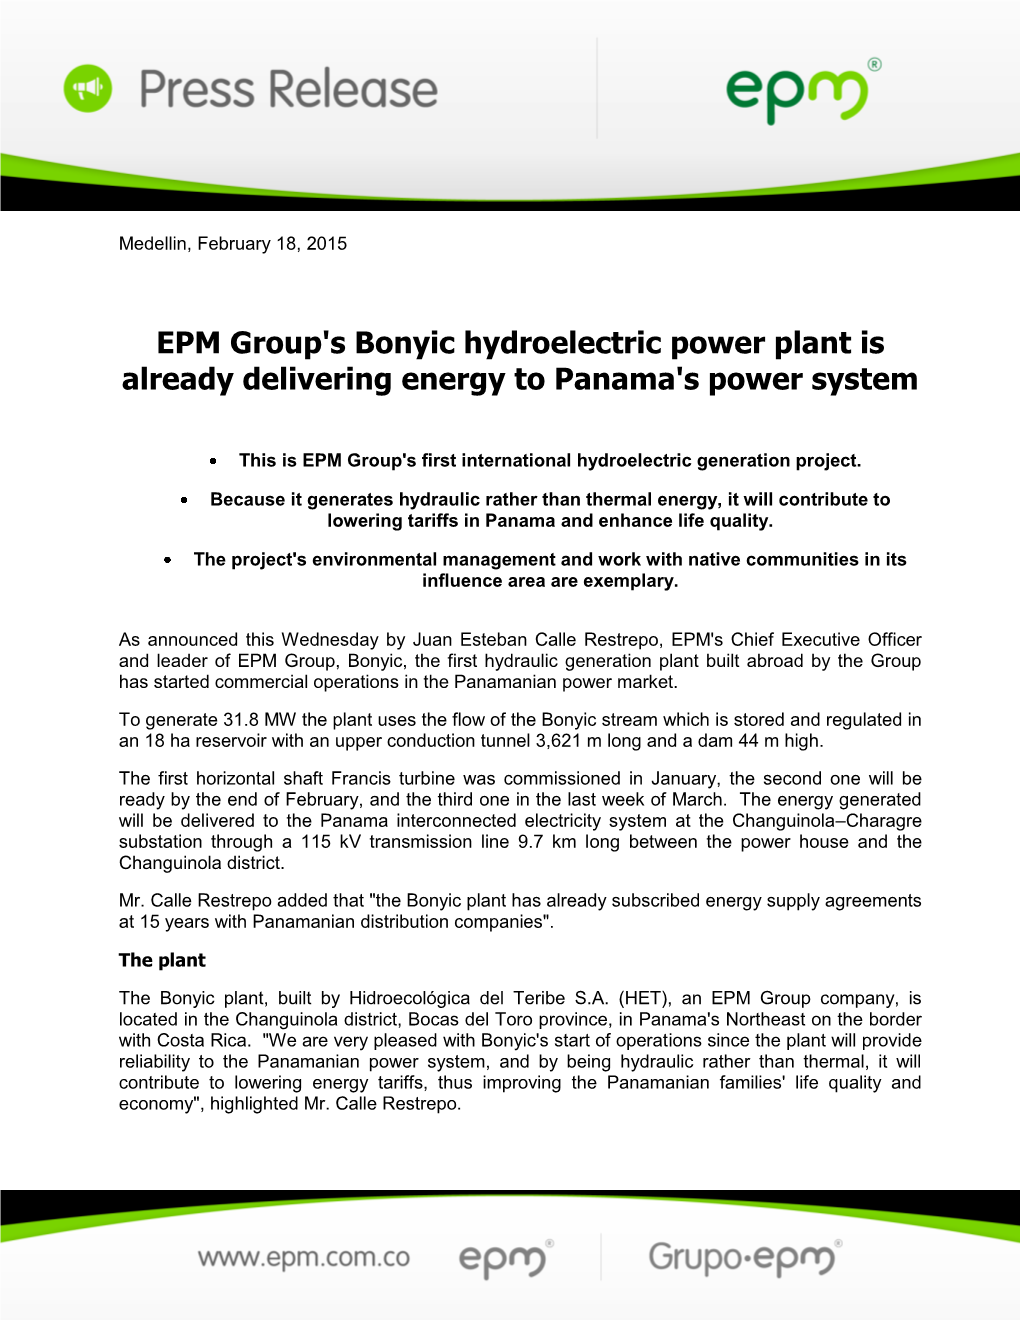 EPM Group's Bonyic Hydroelectric Power Plant Is Already Delivering Energy to Panama's Power System